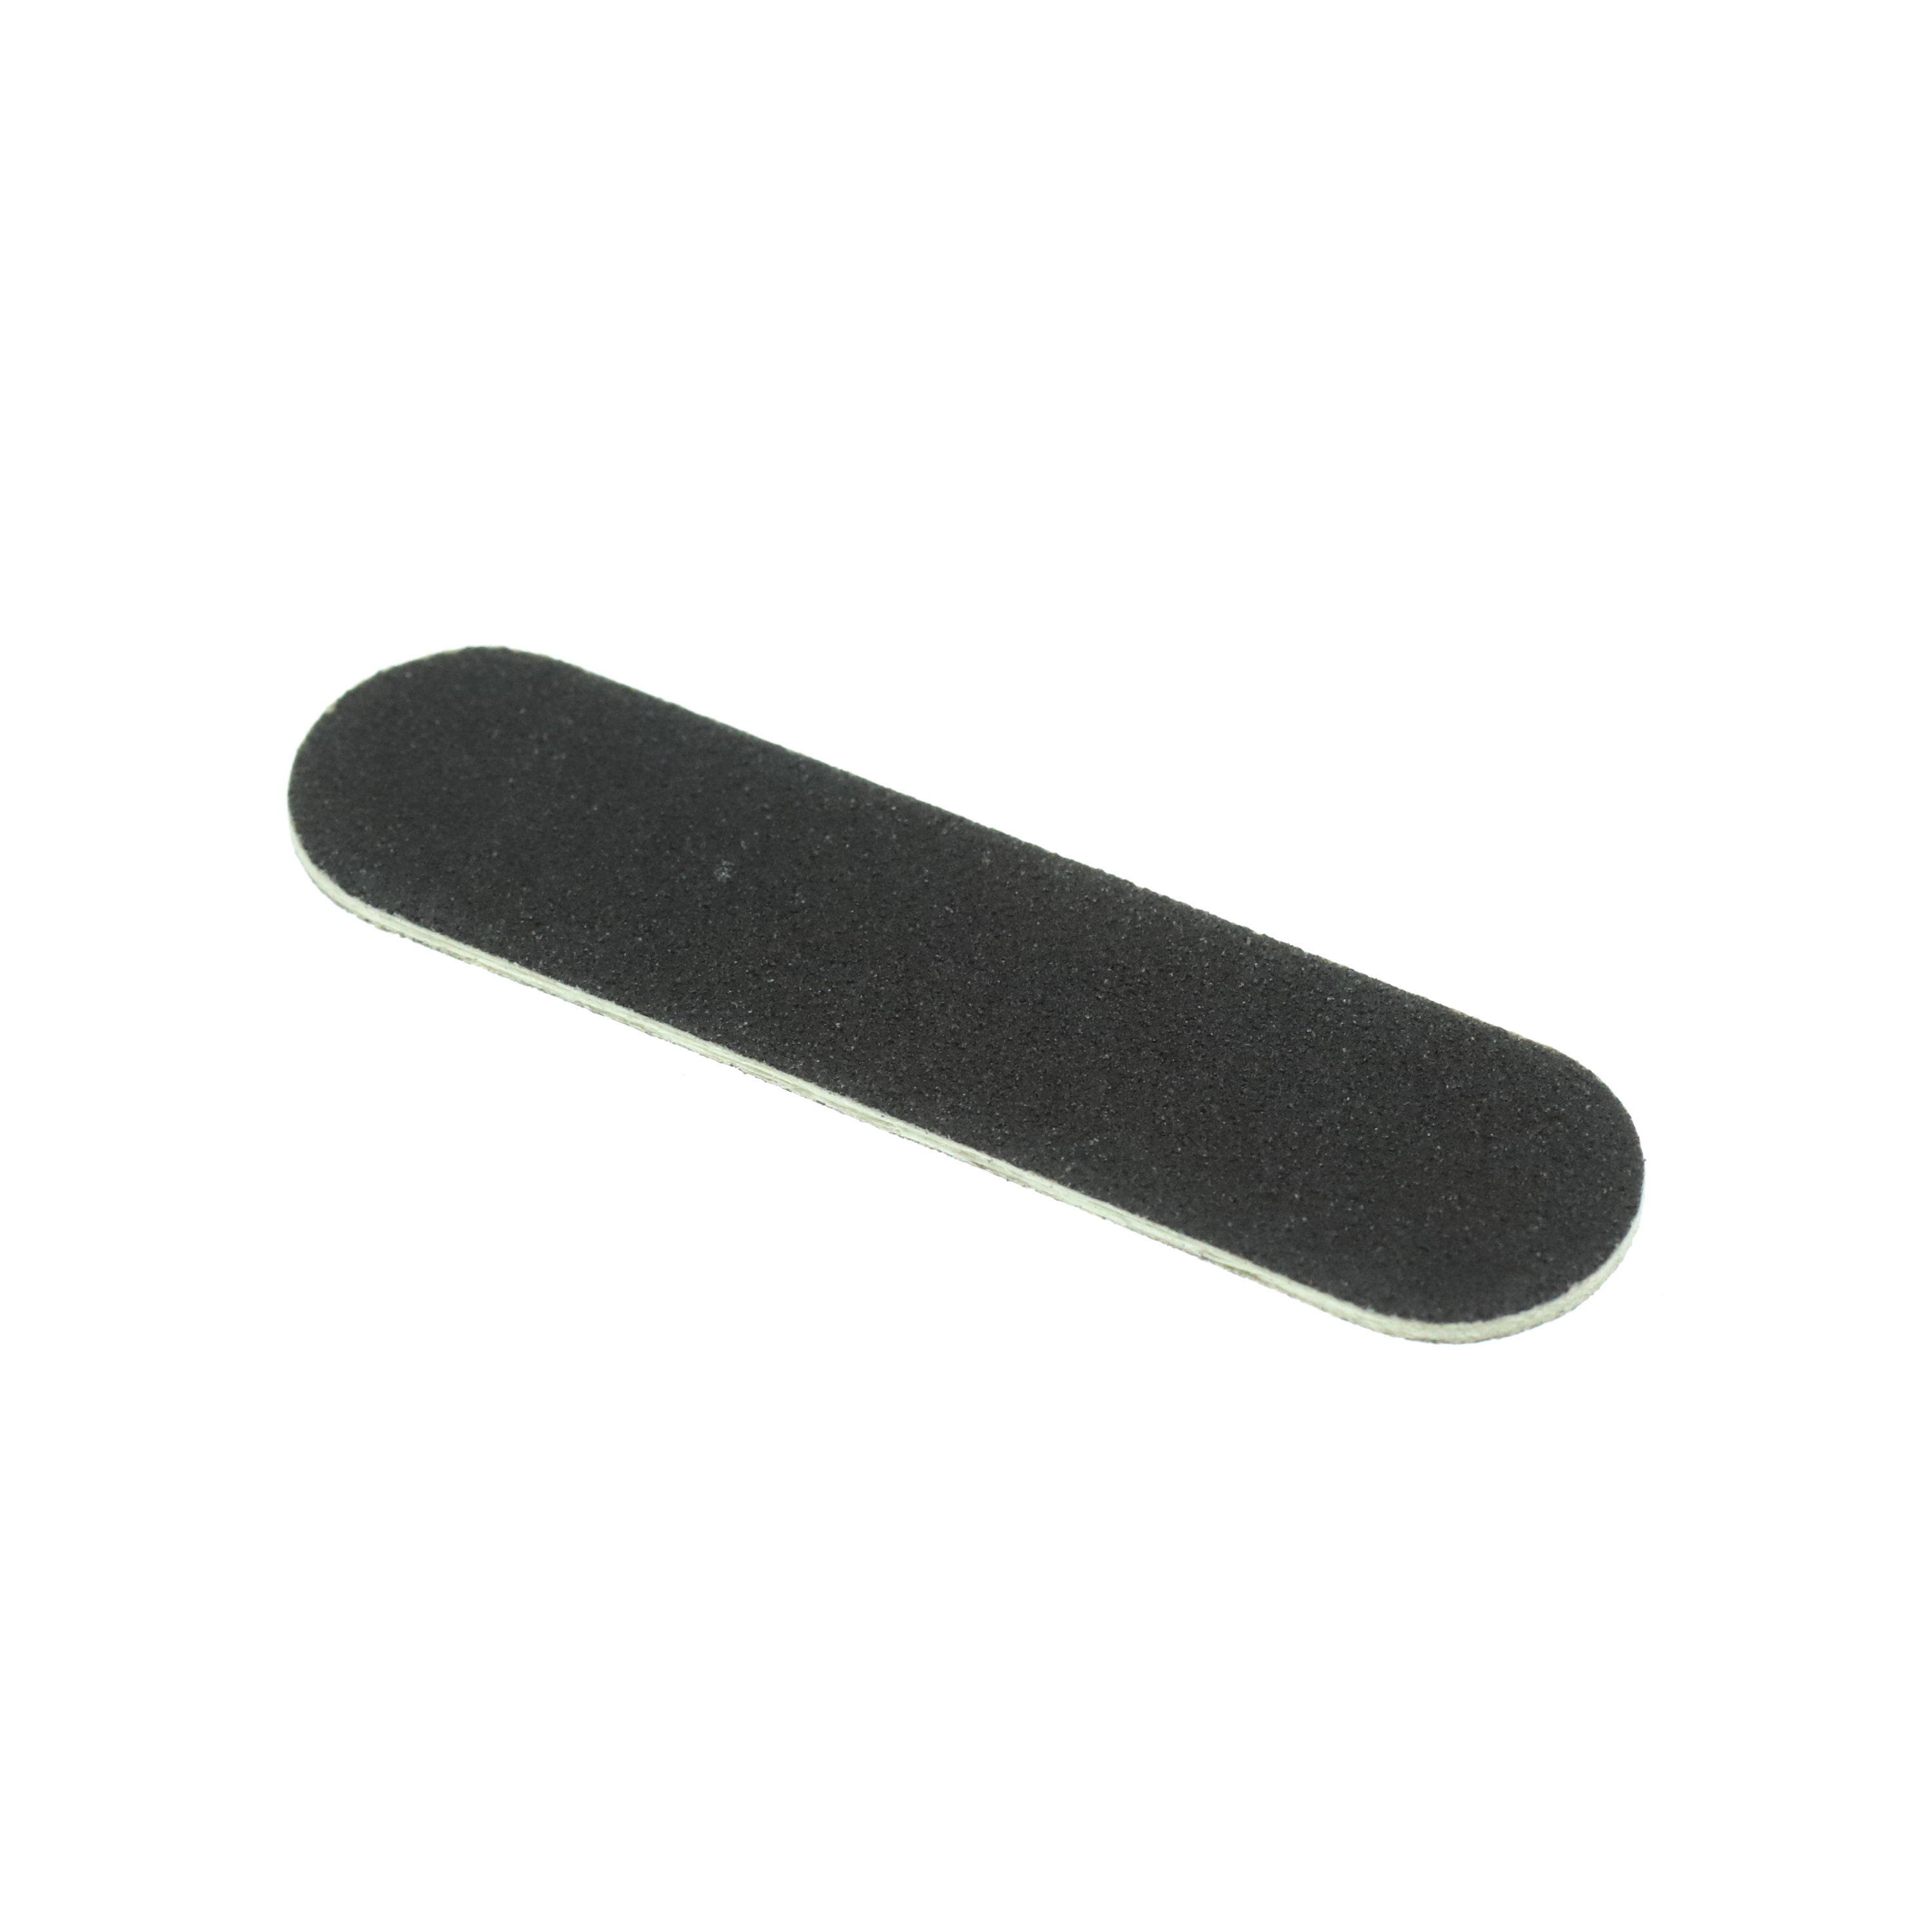 Staff Grips Silicone Tape EPDM Goat Grip Tennis Grip All the